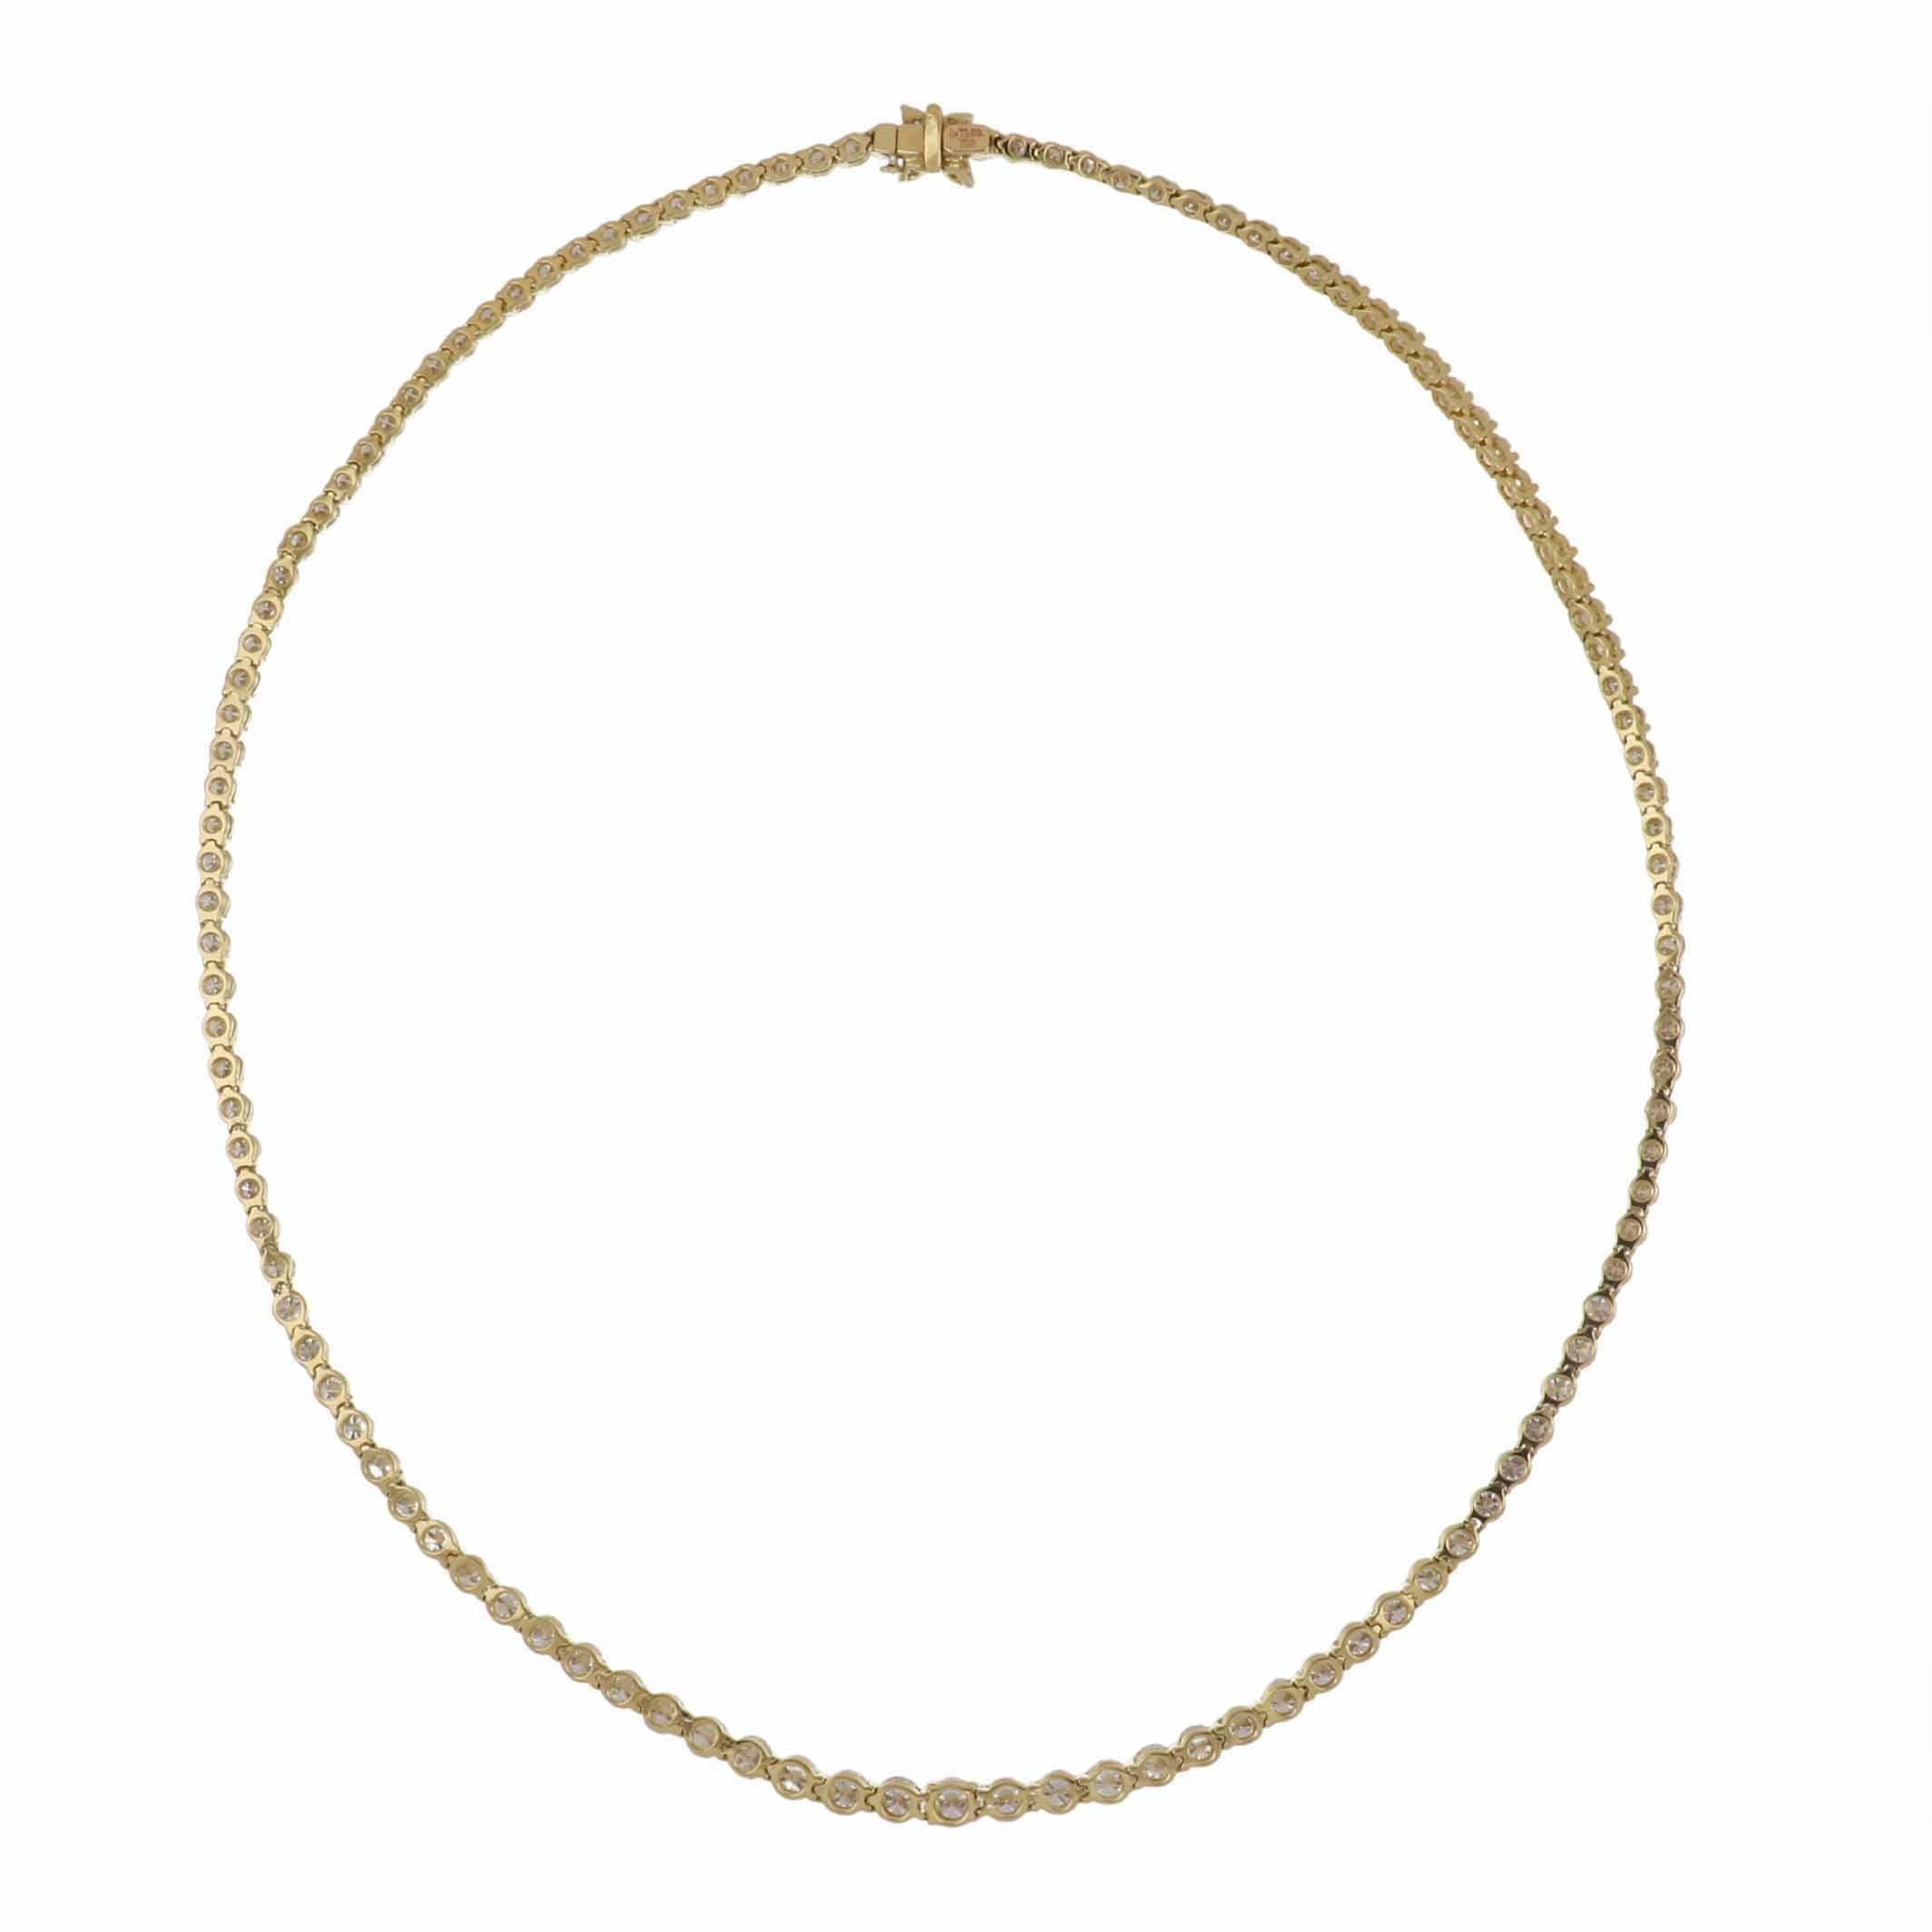 An estate Tiffany & Co. Victoria graduated round diamond riviera necklace in 18K yellow gold. There are 115 round brilliant-cut diamonds that total 10.18 carats and 4 marquise-shaped diamonds at the clasp that total 0.21 carats.  All diamonds are